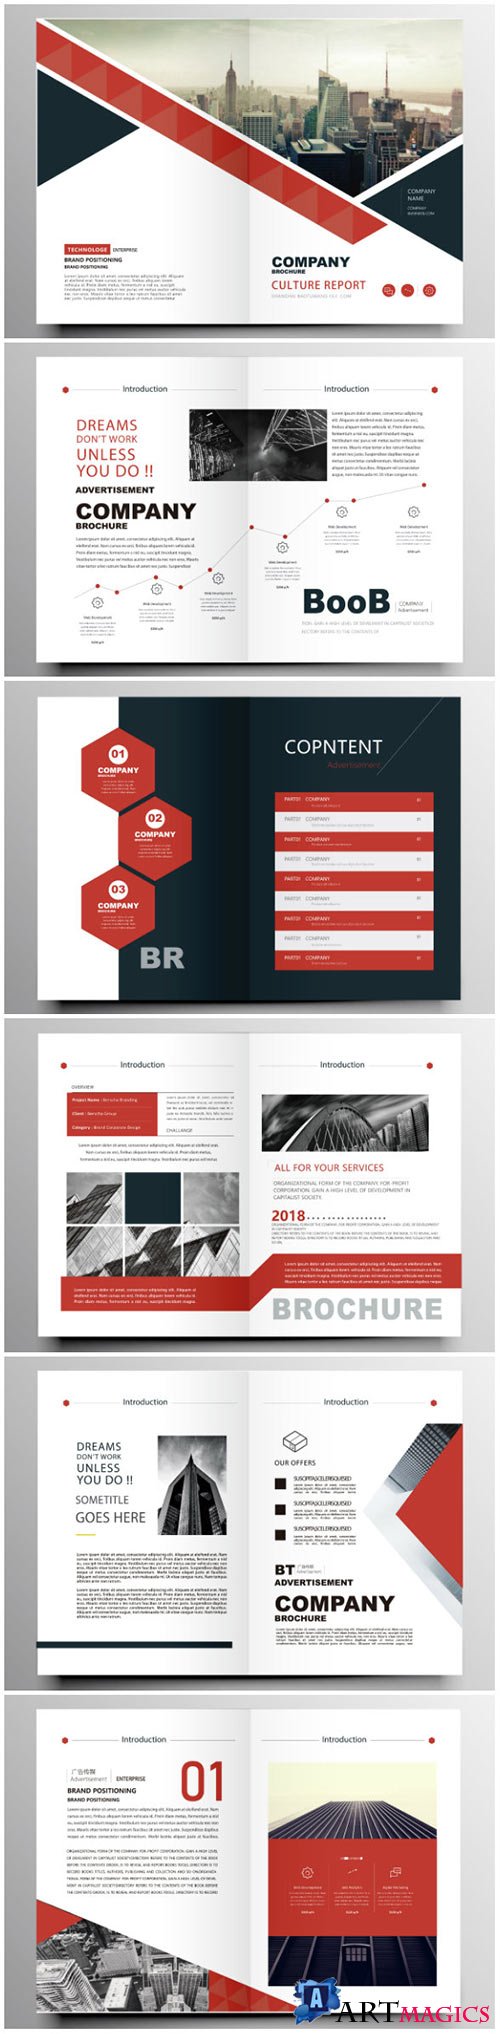 Brochure template vector layout design, corporate business annual report, magazine, flyer mockup # 199